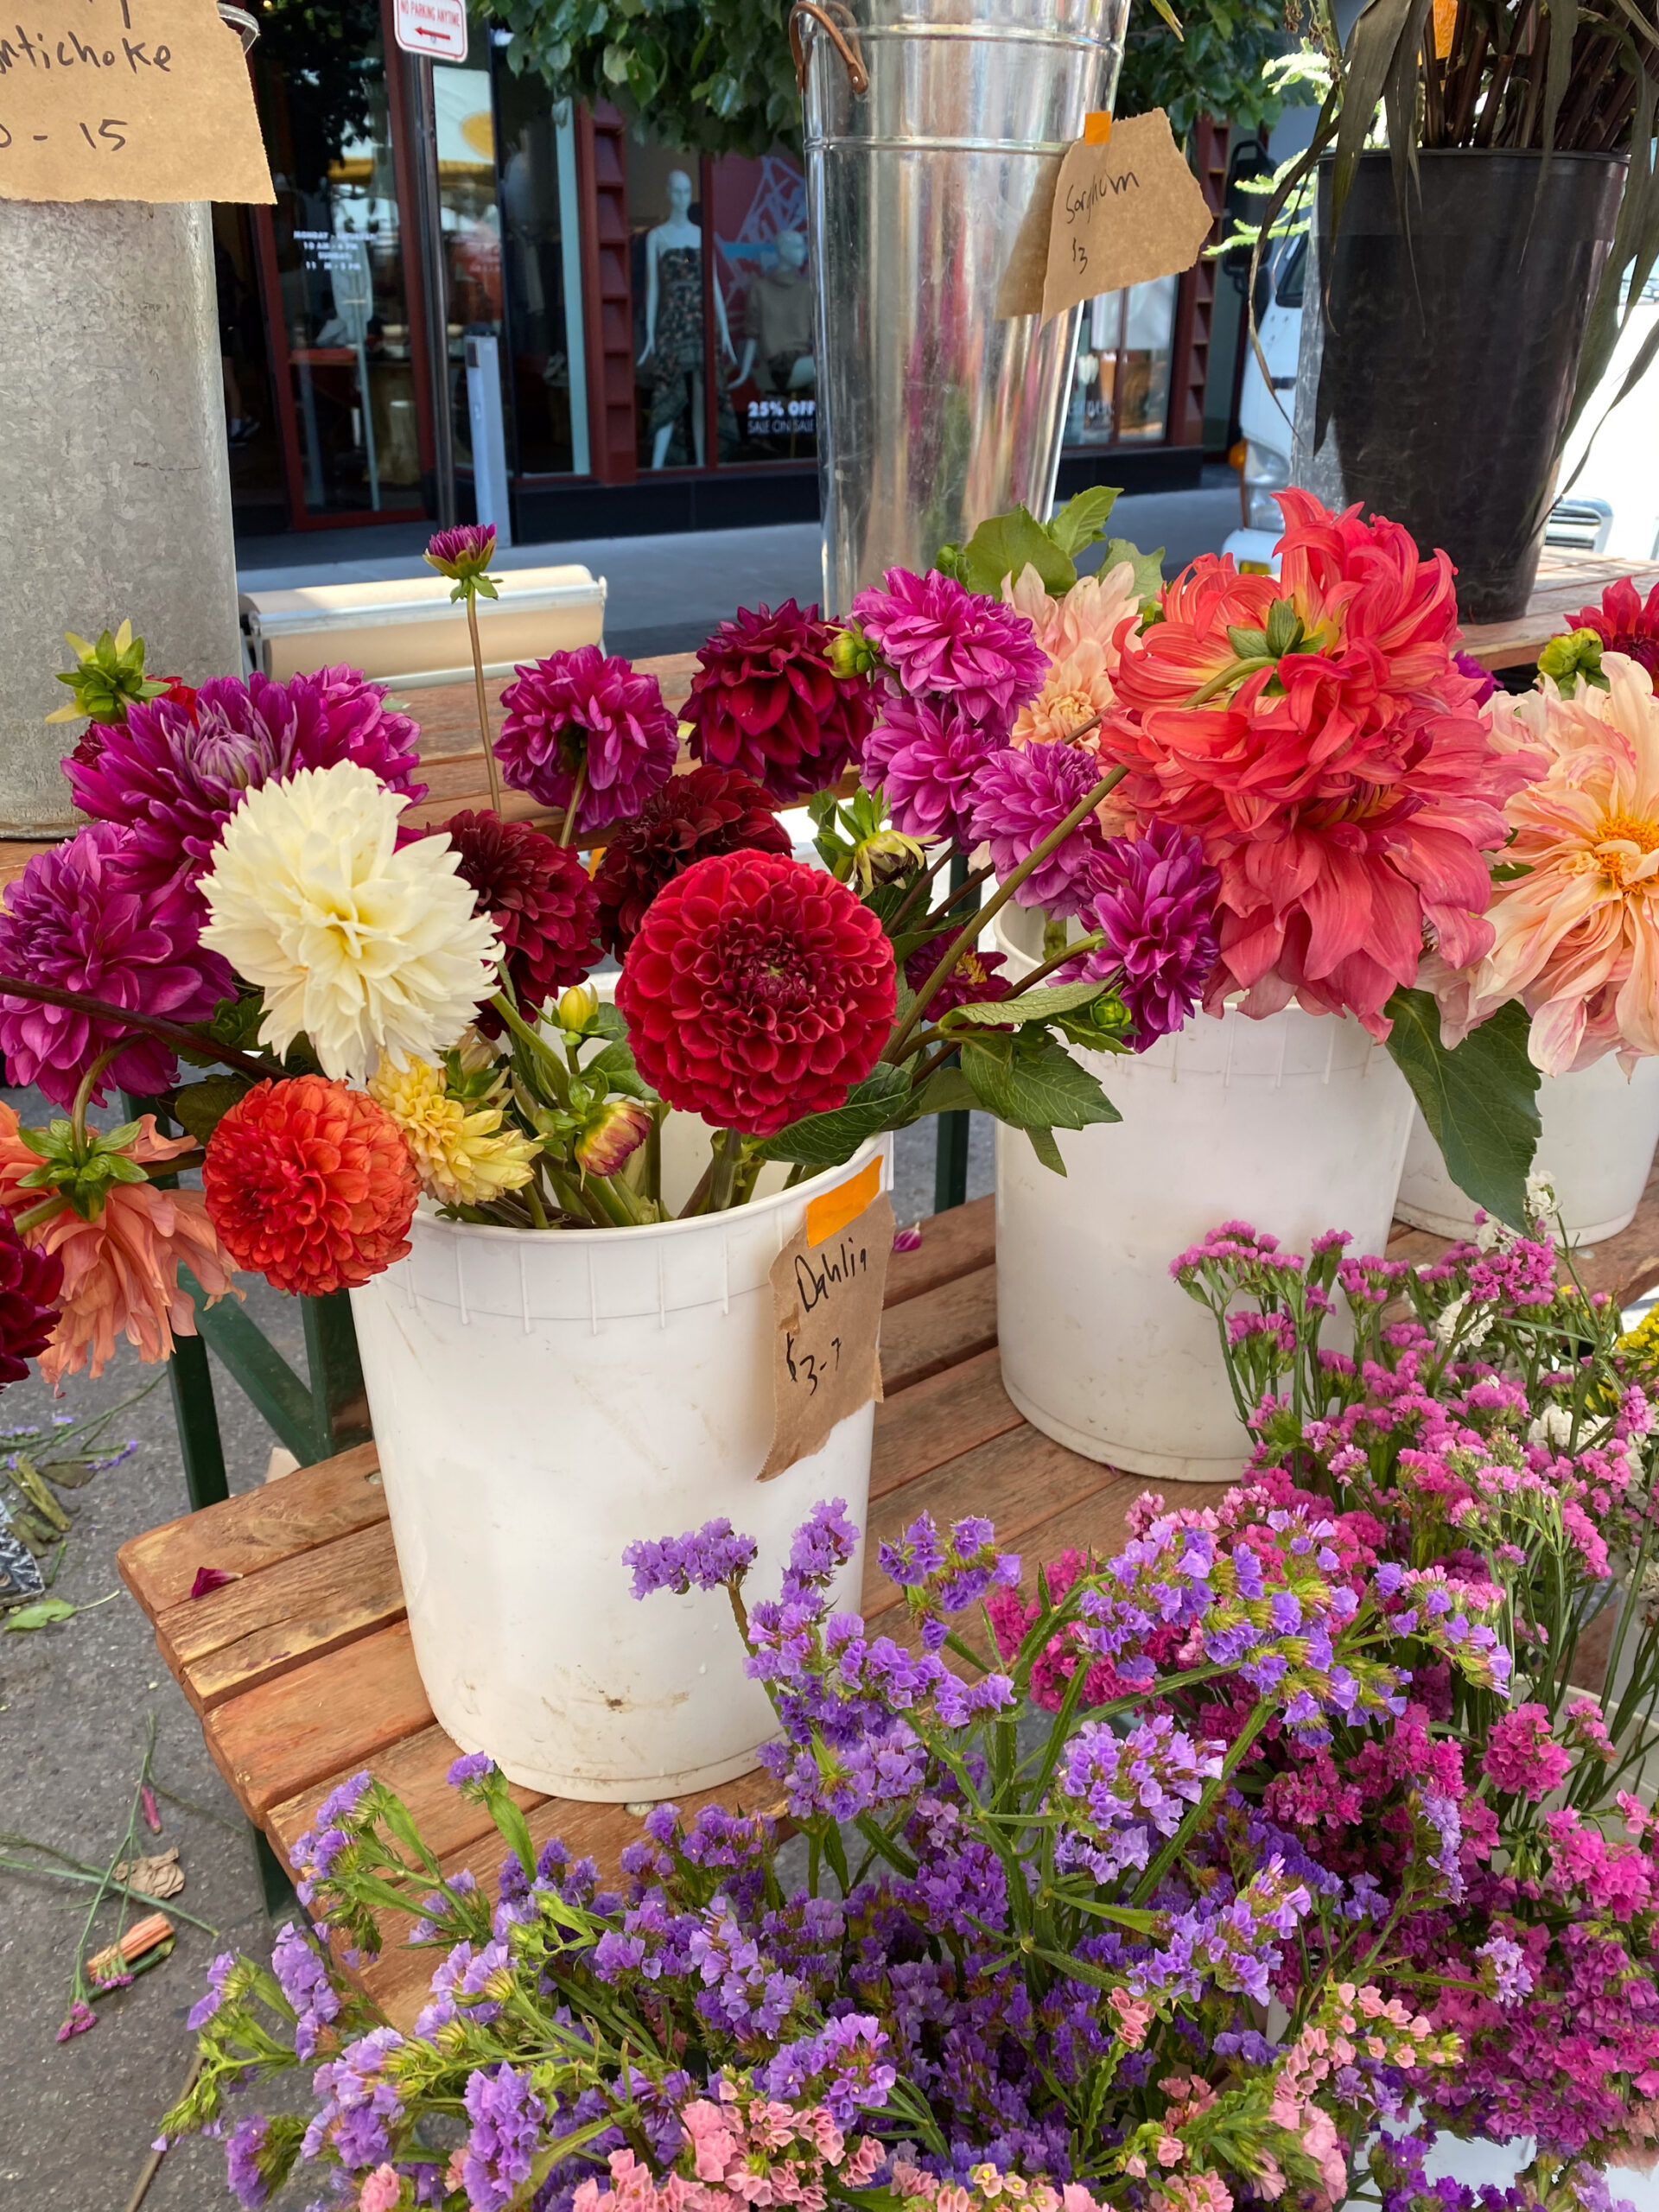 the Aspen Farmers' Market on Saturdays during the Summer is a great place to pick up some locally grown flowers, bread and pastries, local produce and more #aspenfarmersmarket #mountainflowers #visitaspen